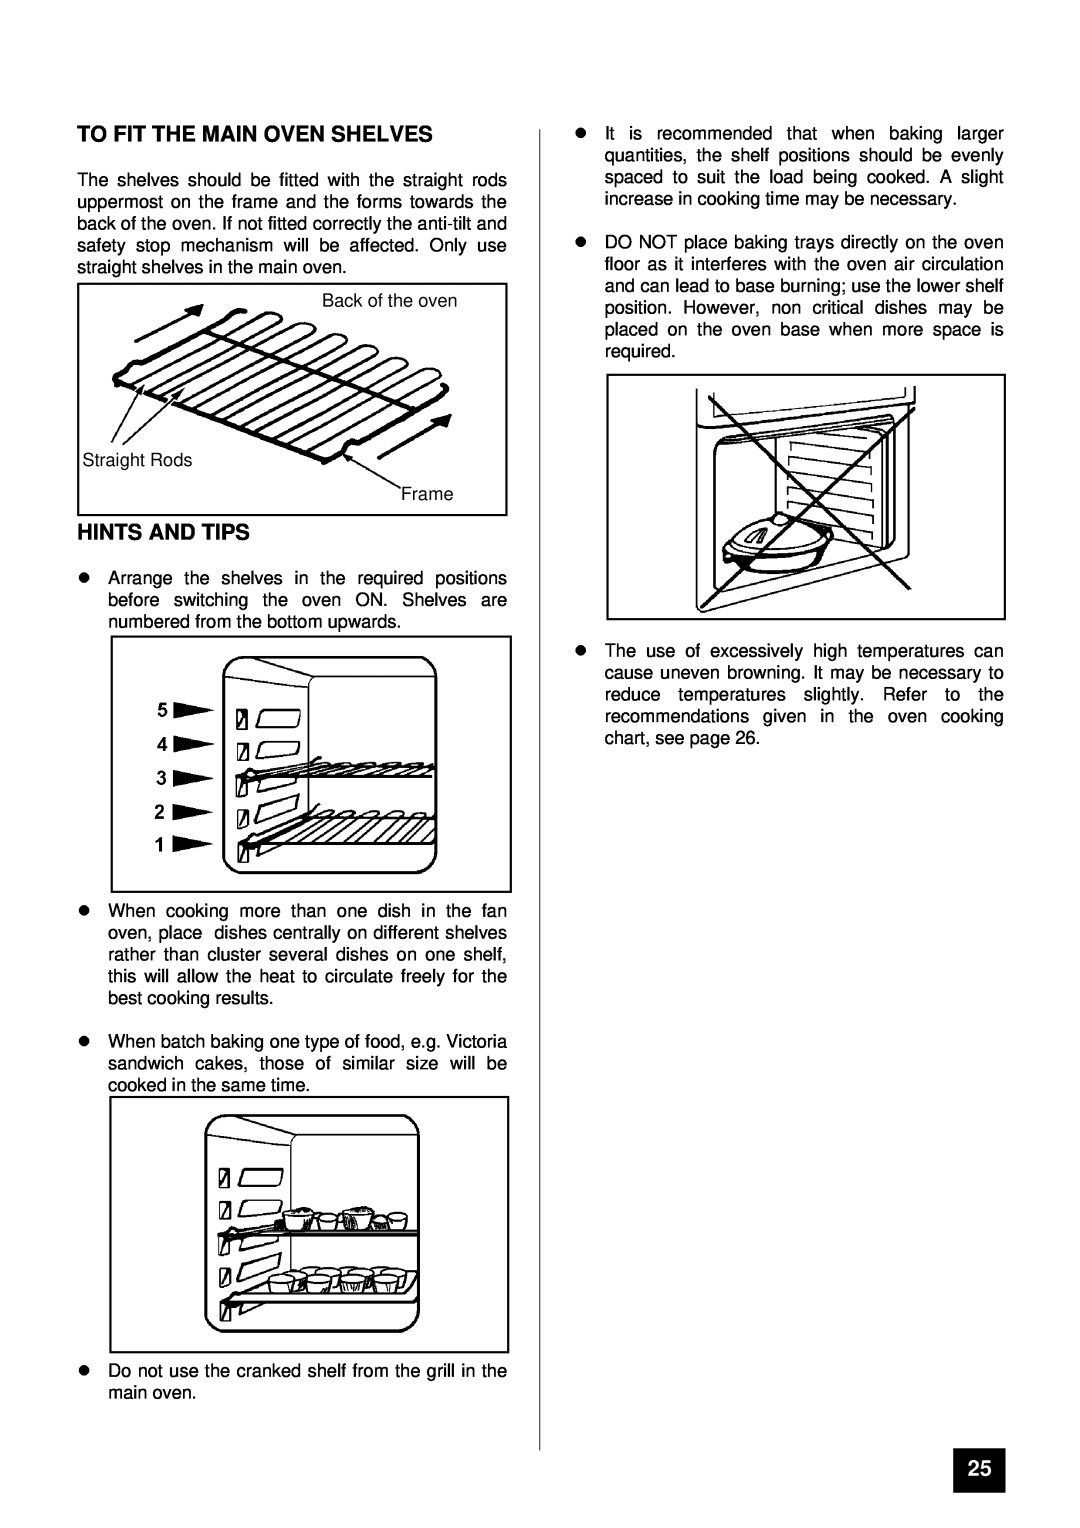 Tricity Bendix BD 985 installation instructions To Fit The Main Oven Shelves, lHINTS AND TIPS 